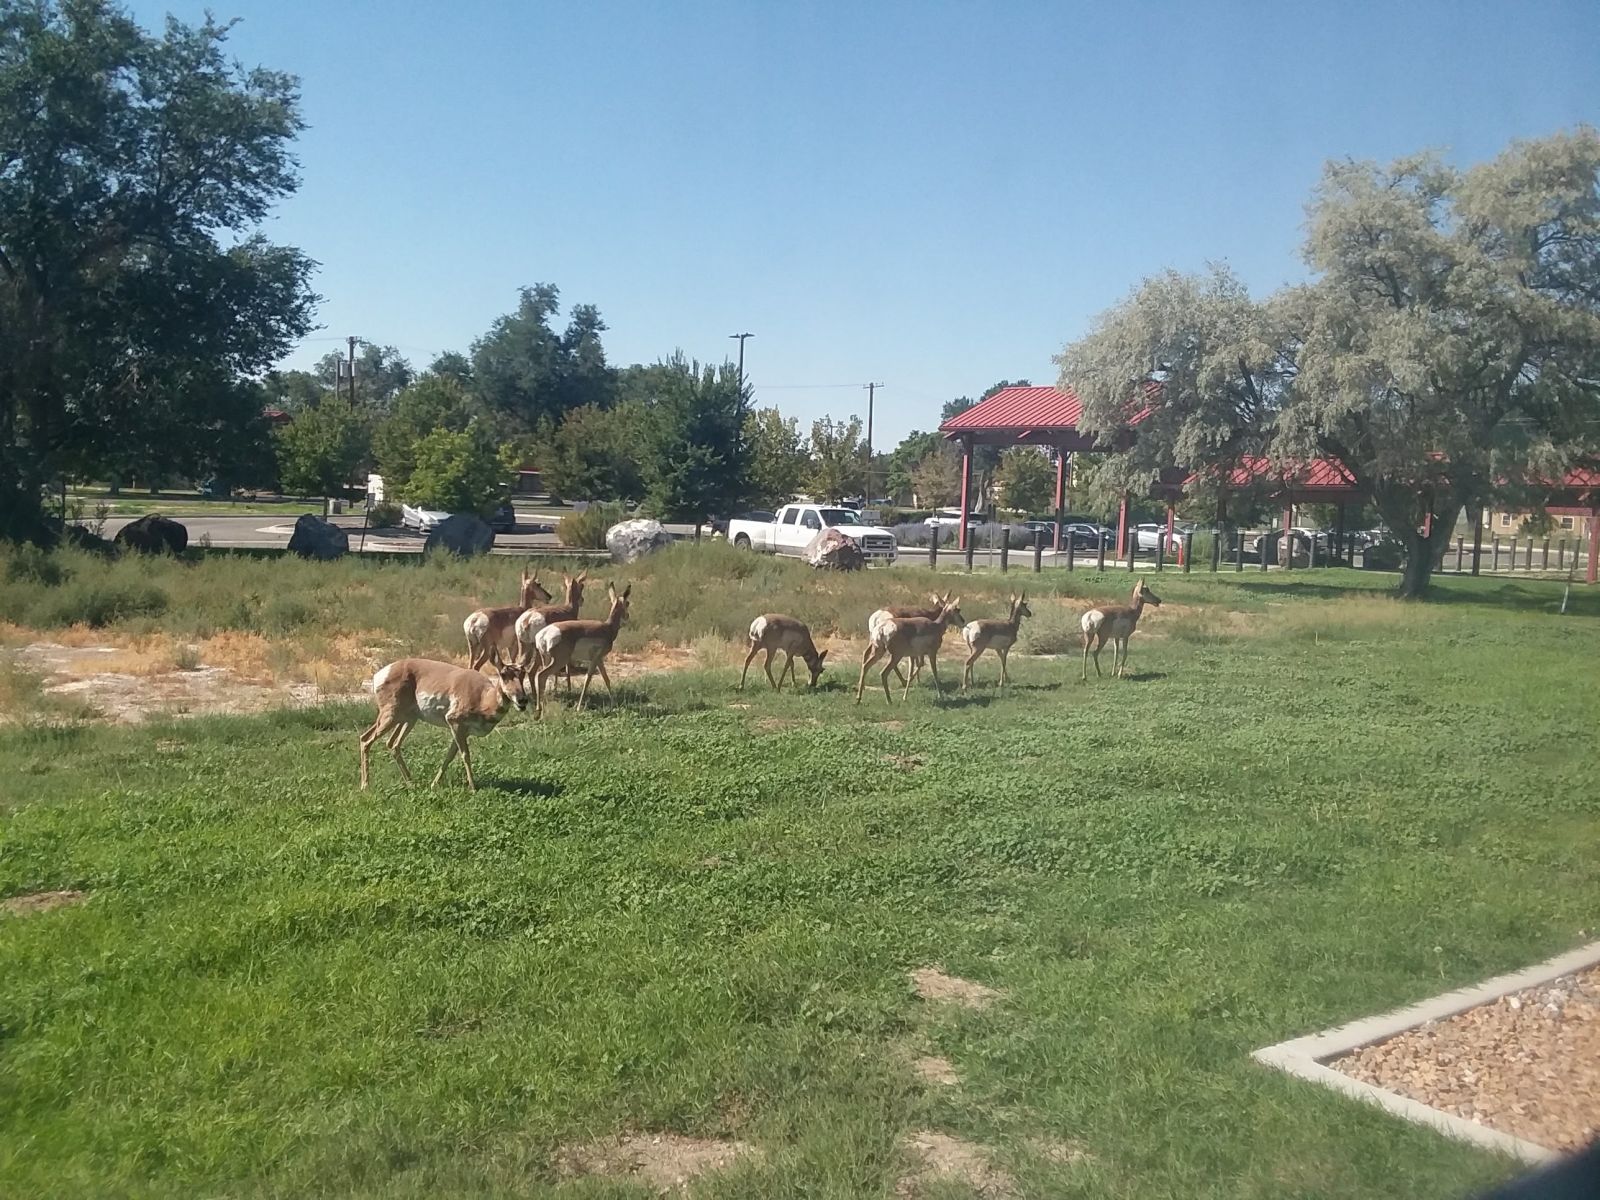 I woke up Saturday around 8am to a herd of Antelope outside of my hotel window